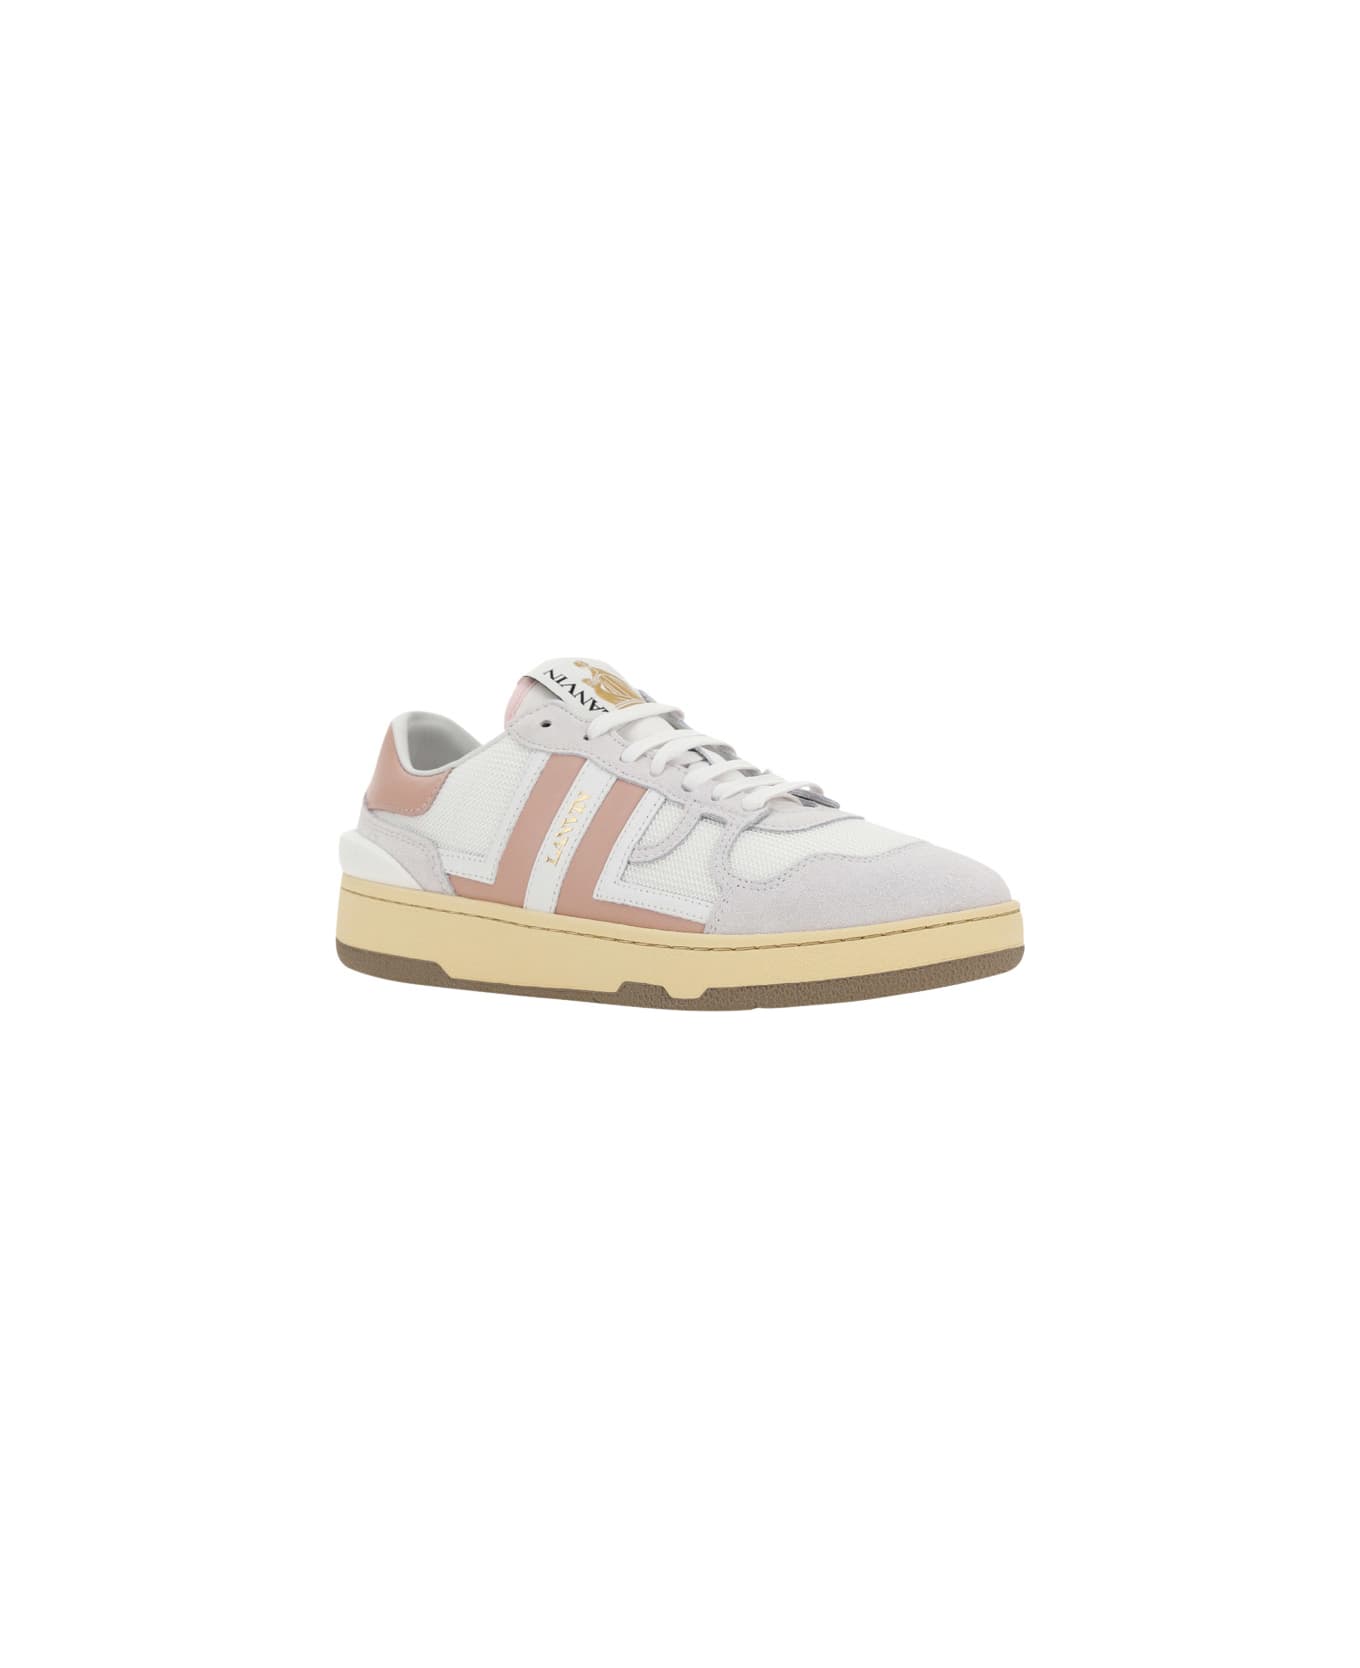 Lanvin Clay Sneakers - White/nude